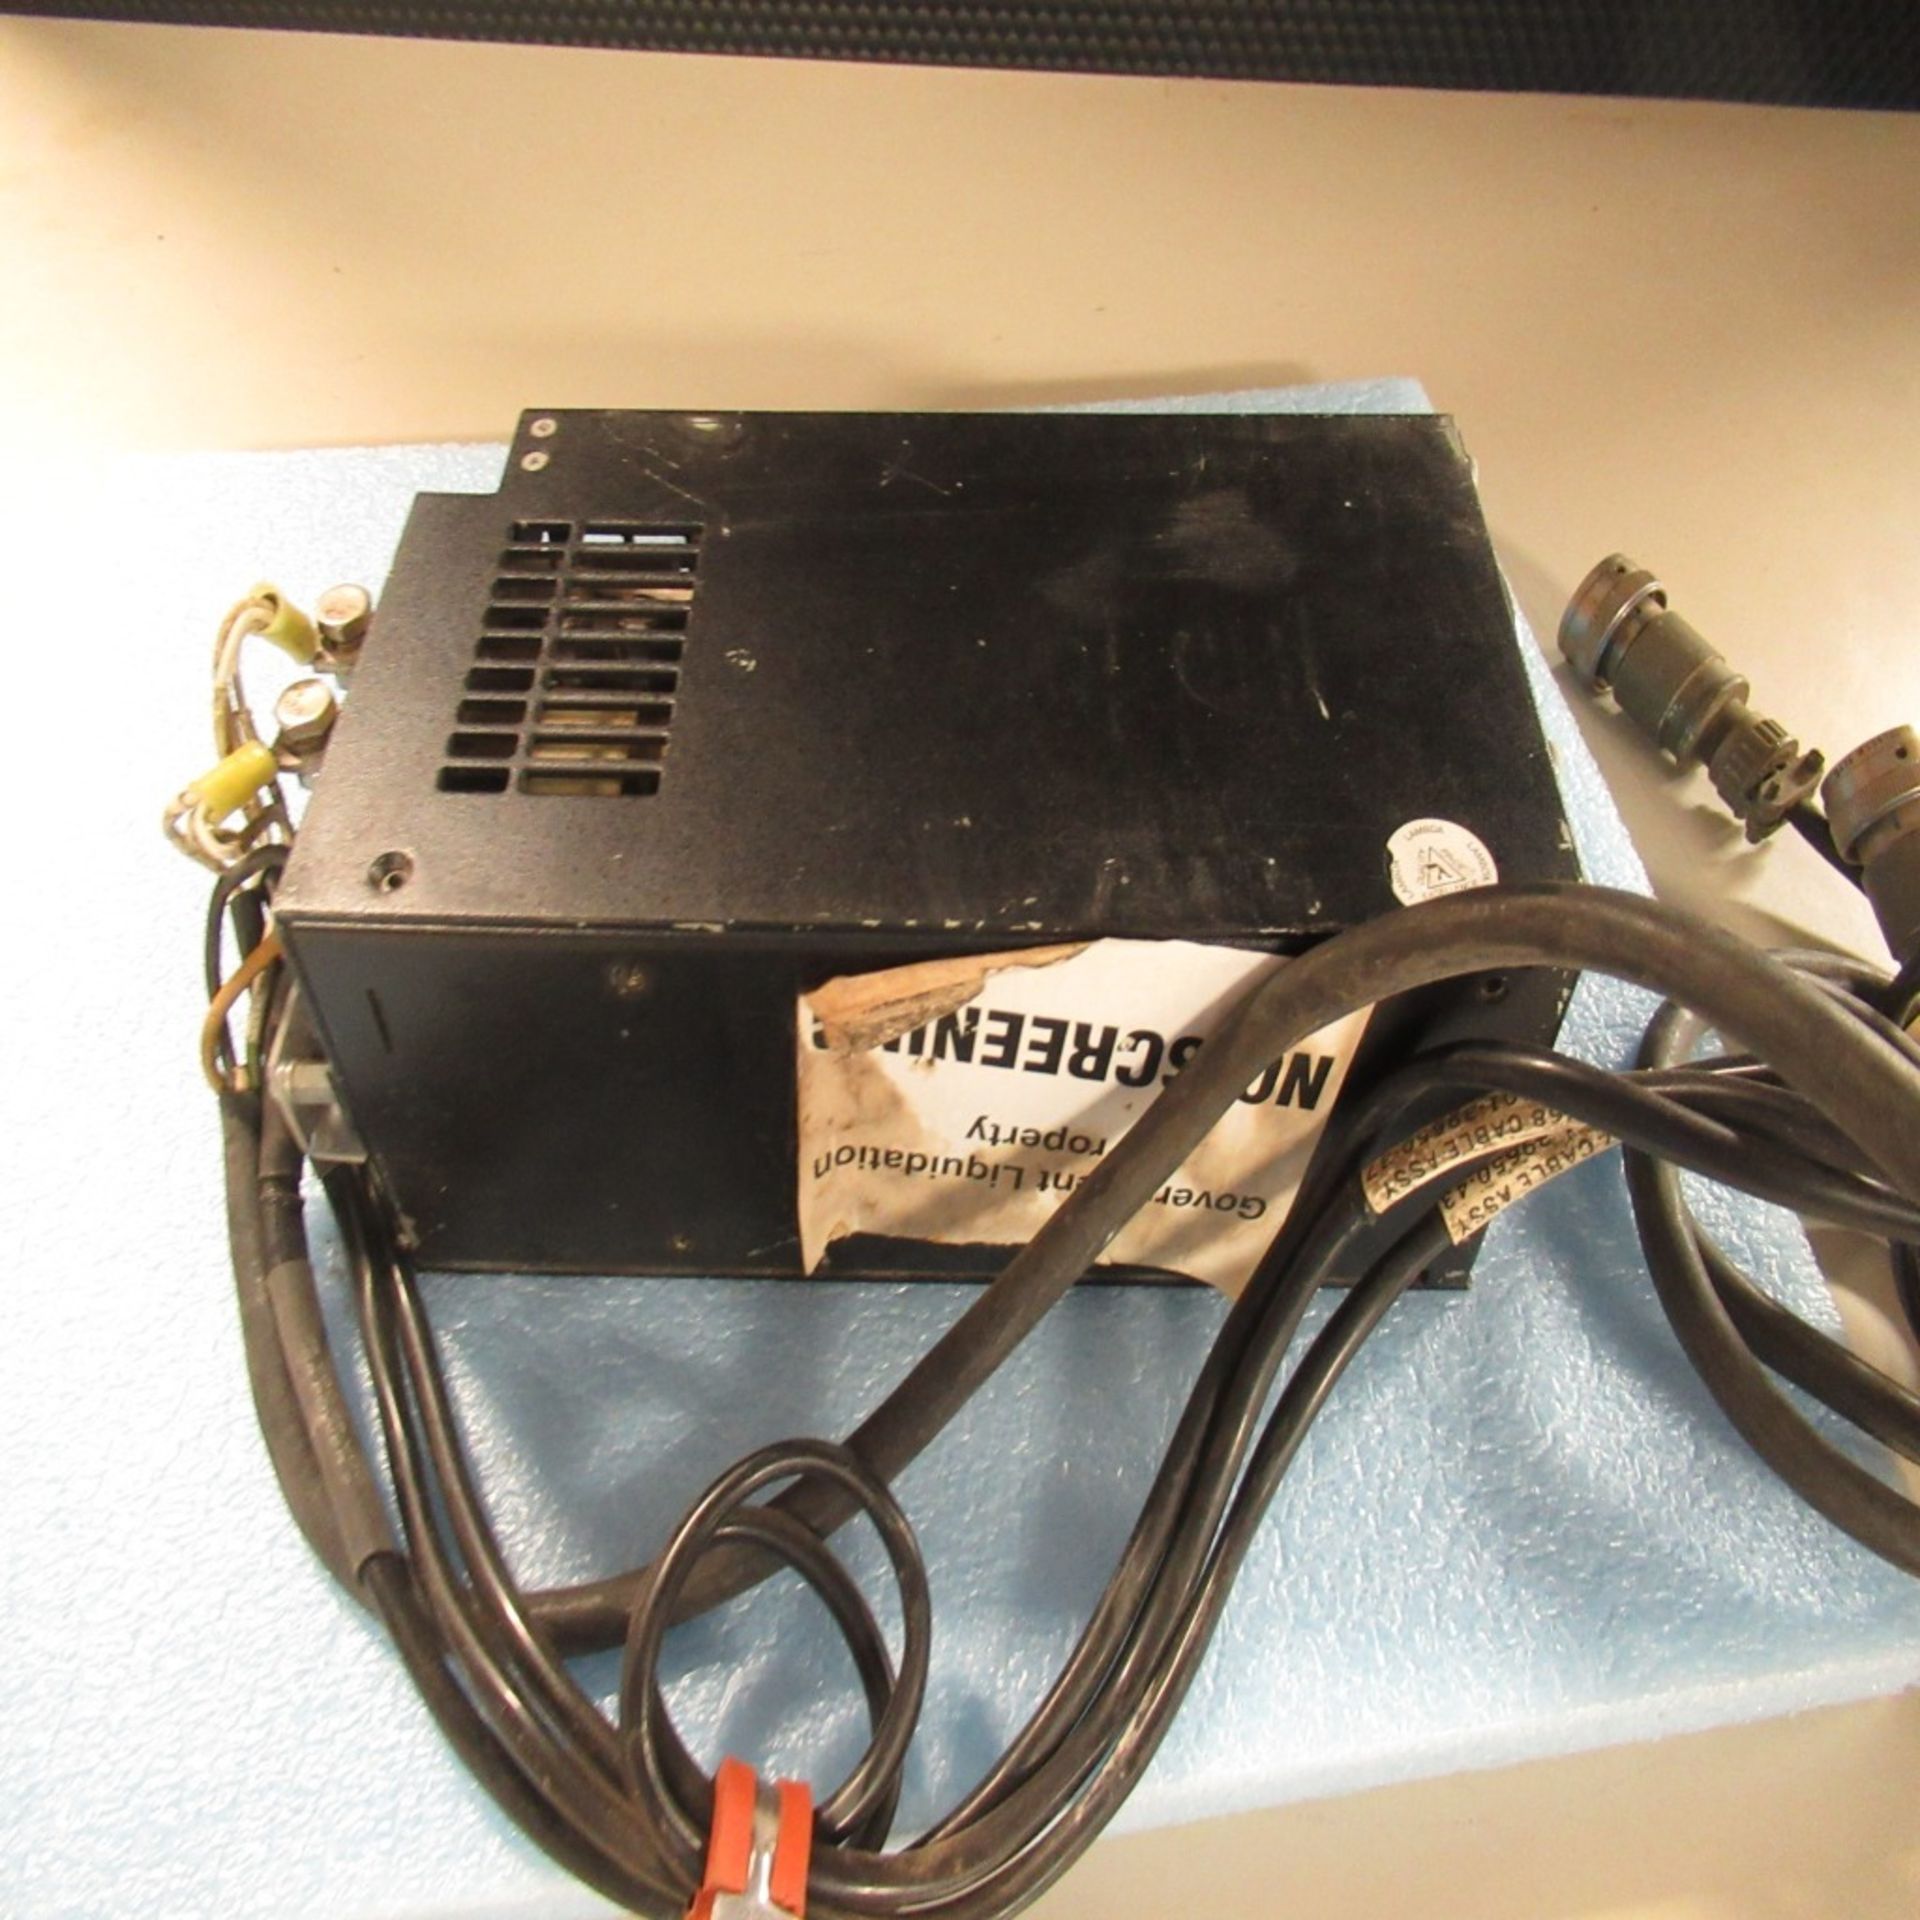 PHOTON SNAP SHOT MODEL 6000 *POWERS ON* NO SCREEN DISPLAY; FARNELL AP20-80 REGULATED POWER SUPPLY * - Image 131 of 222